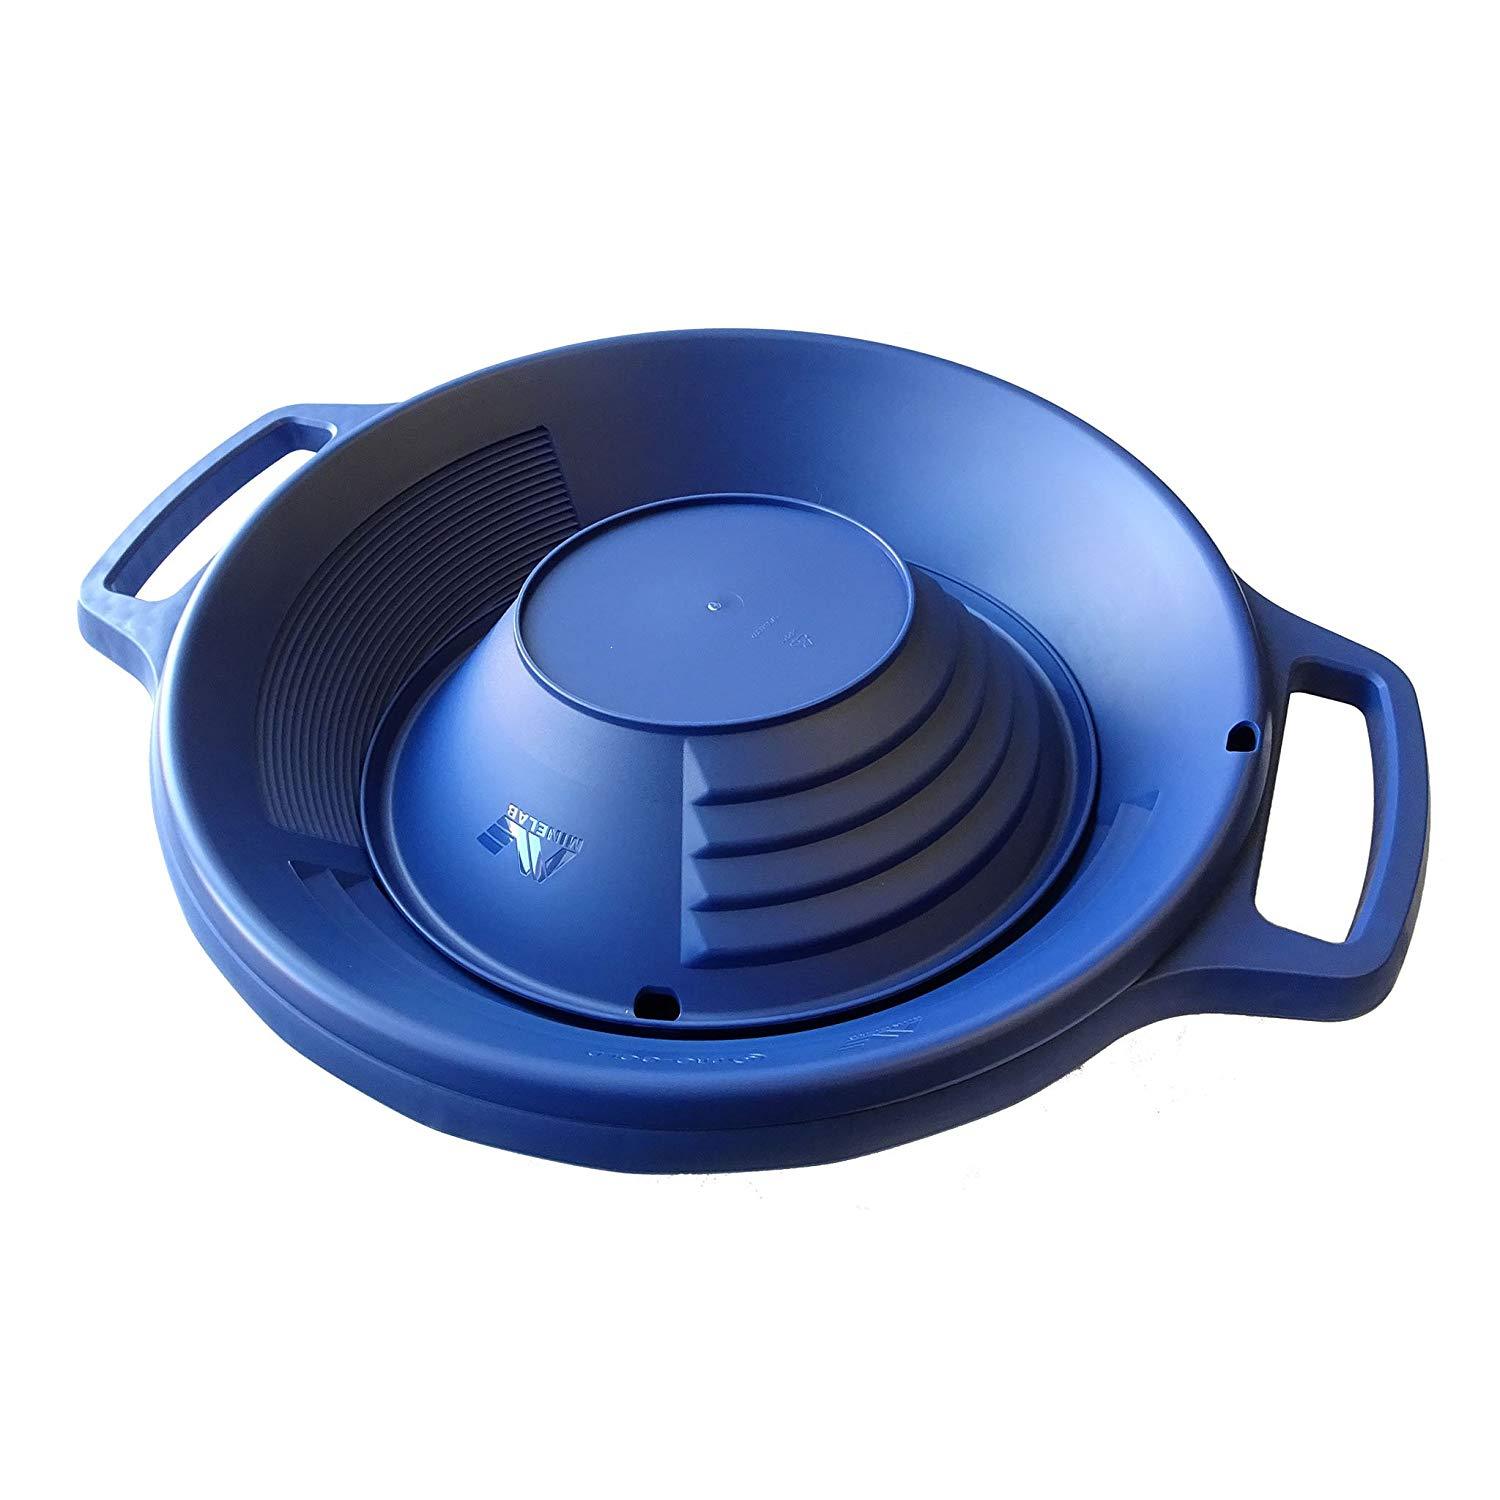 Professional Cookware & Accessories